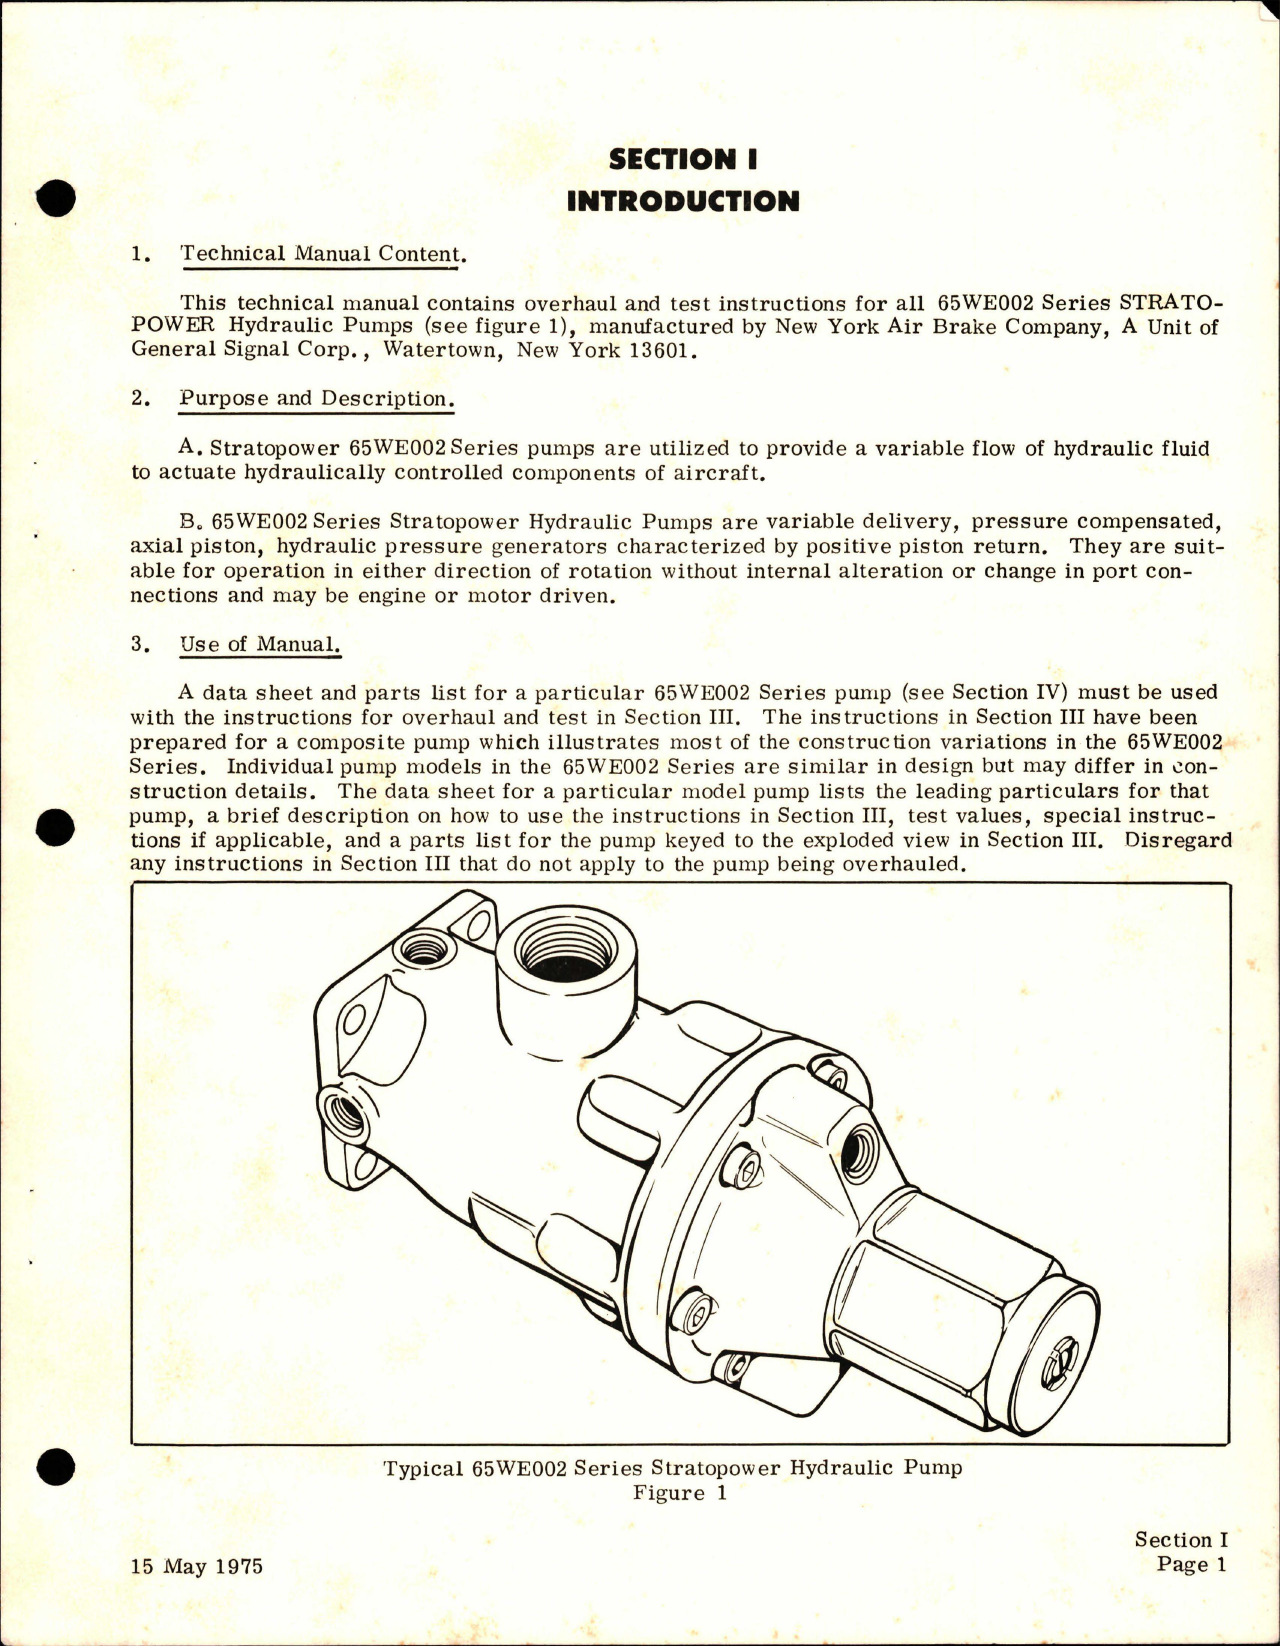 Sample page 5 from AirCorps Library document: Overhaul Instructions with Parts for Stratopower Hydraulic Pump - 65WE002 Series